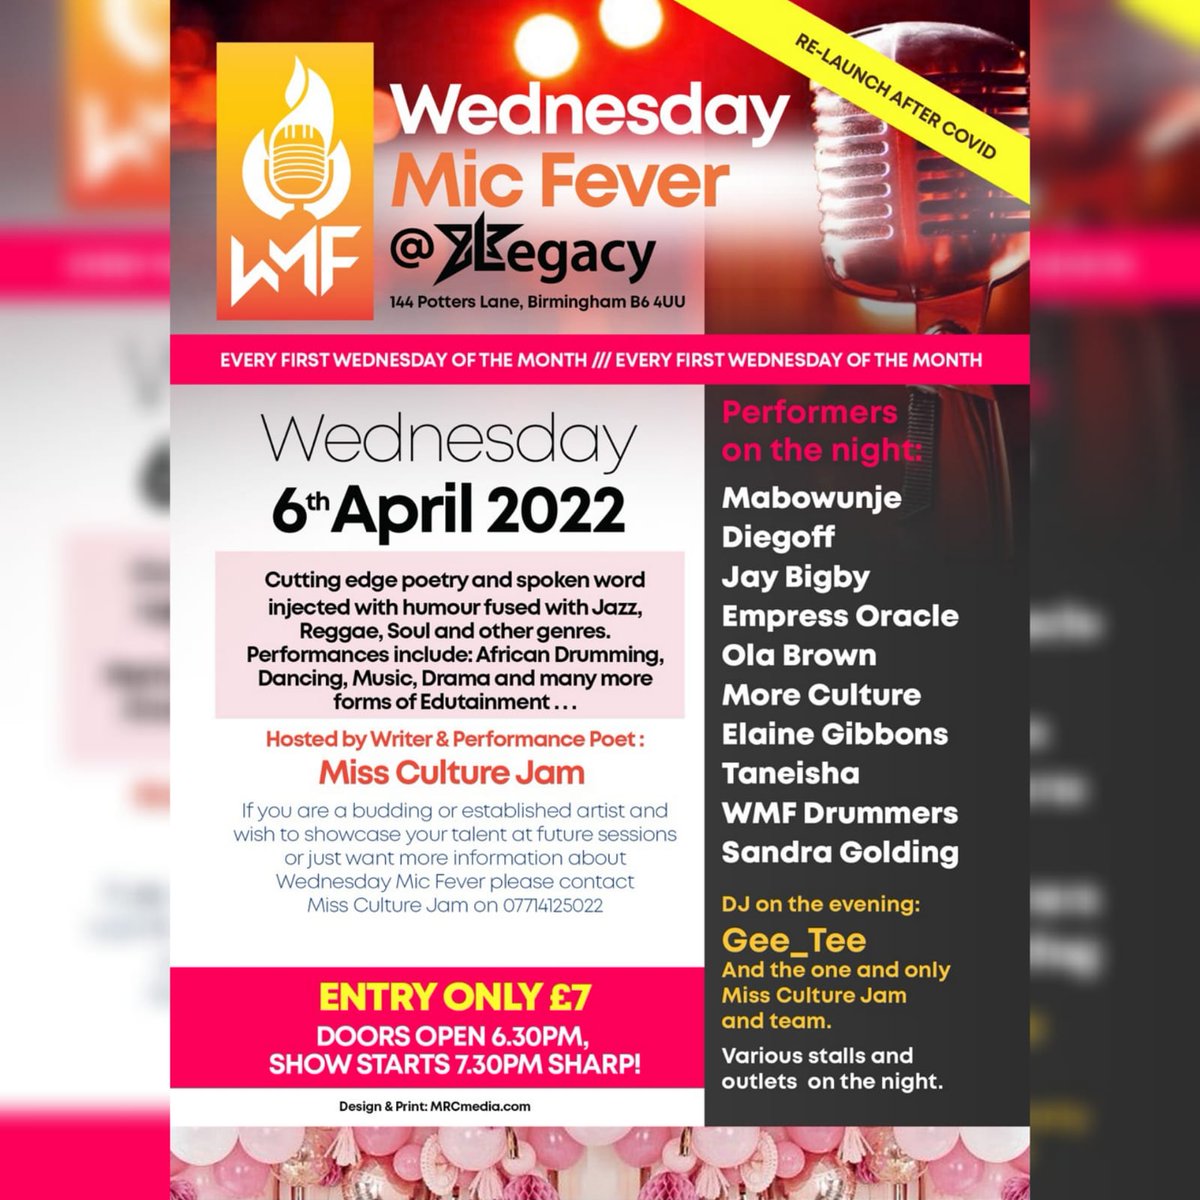 Are you ready for… the Wednesday mic fever relaunch?!

Come along and enjoy Birmingham’s very own talents! You won’t want to miss it.

#wednesdaymicfever #art #talent #birminghamuk #birminghamevents #thingstodoinbirmingham #legacycoe #legacycentreofexcellence